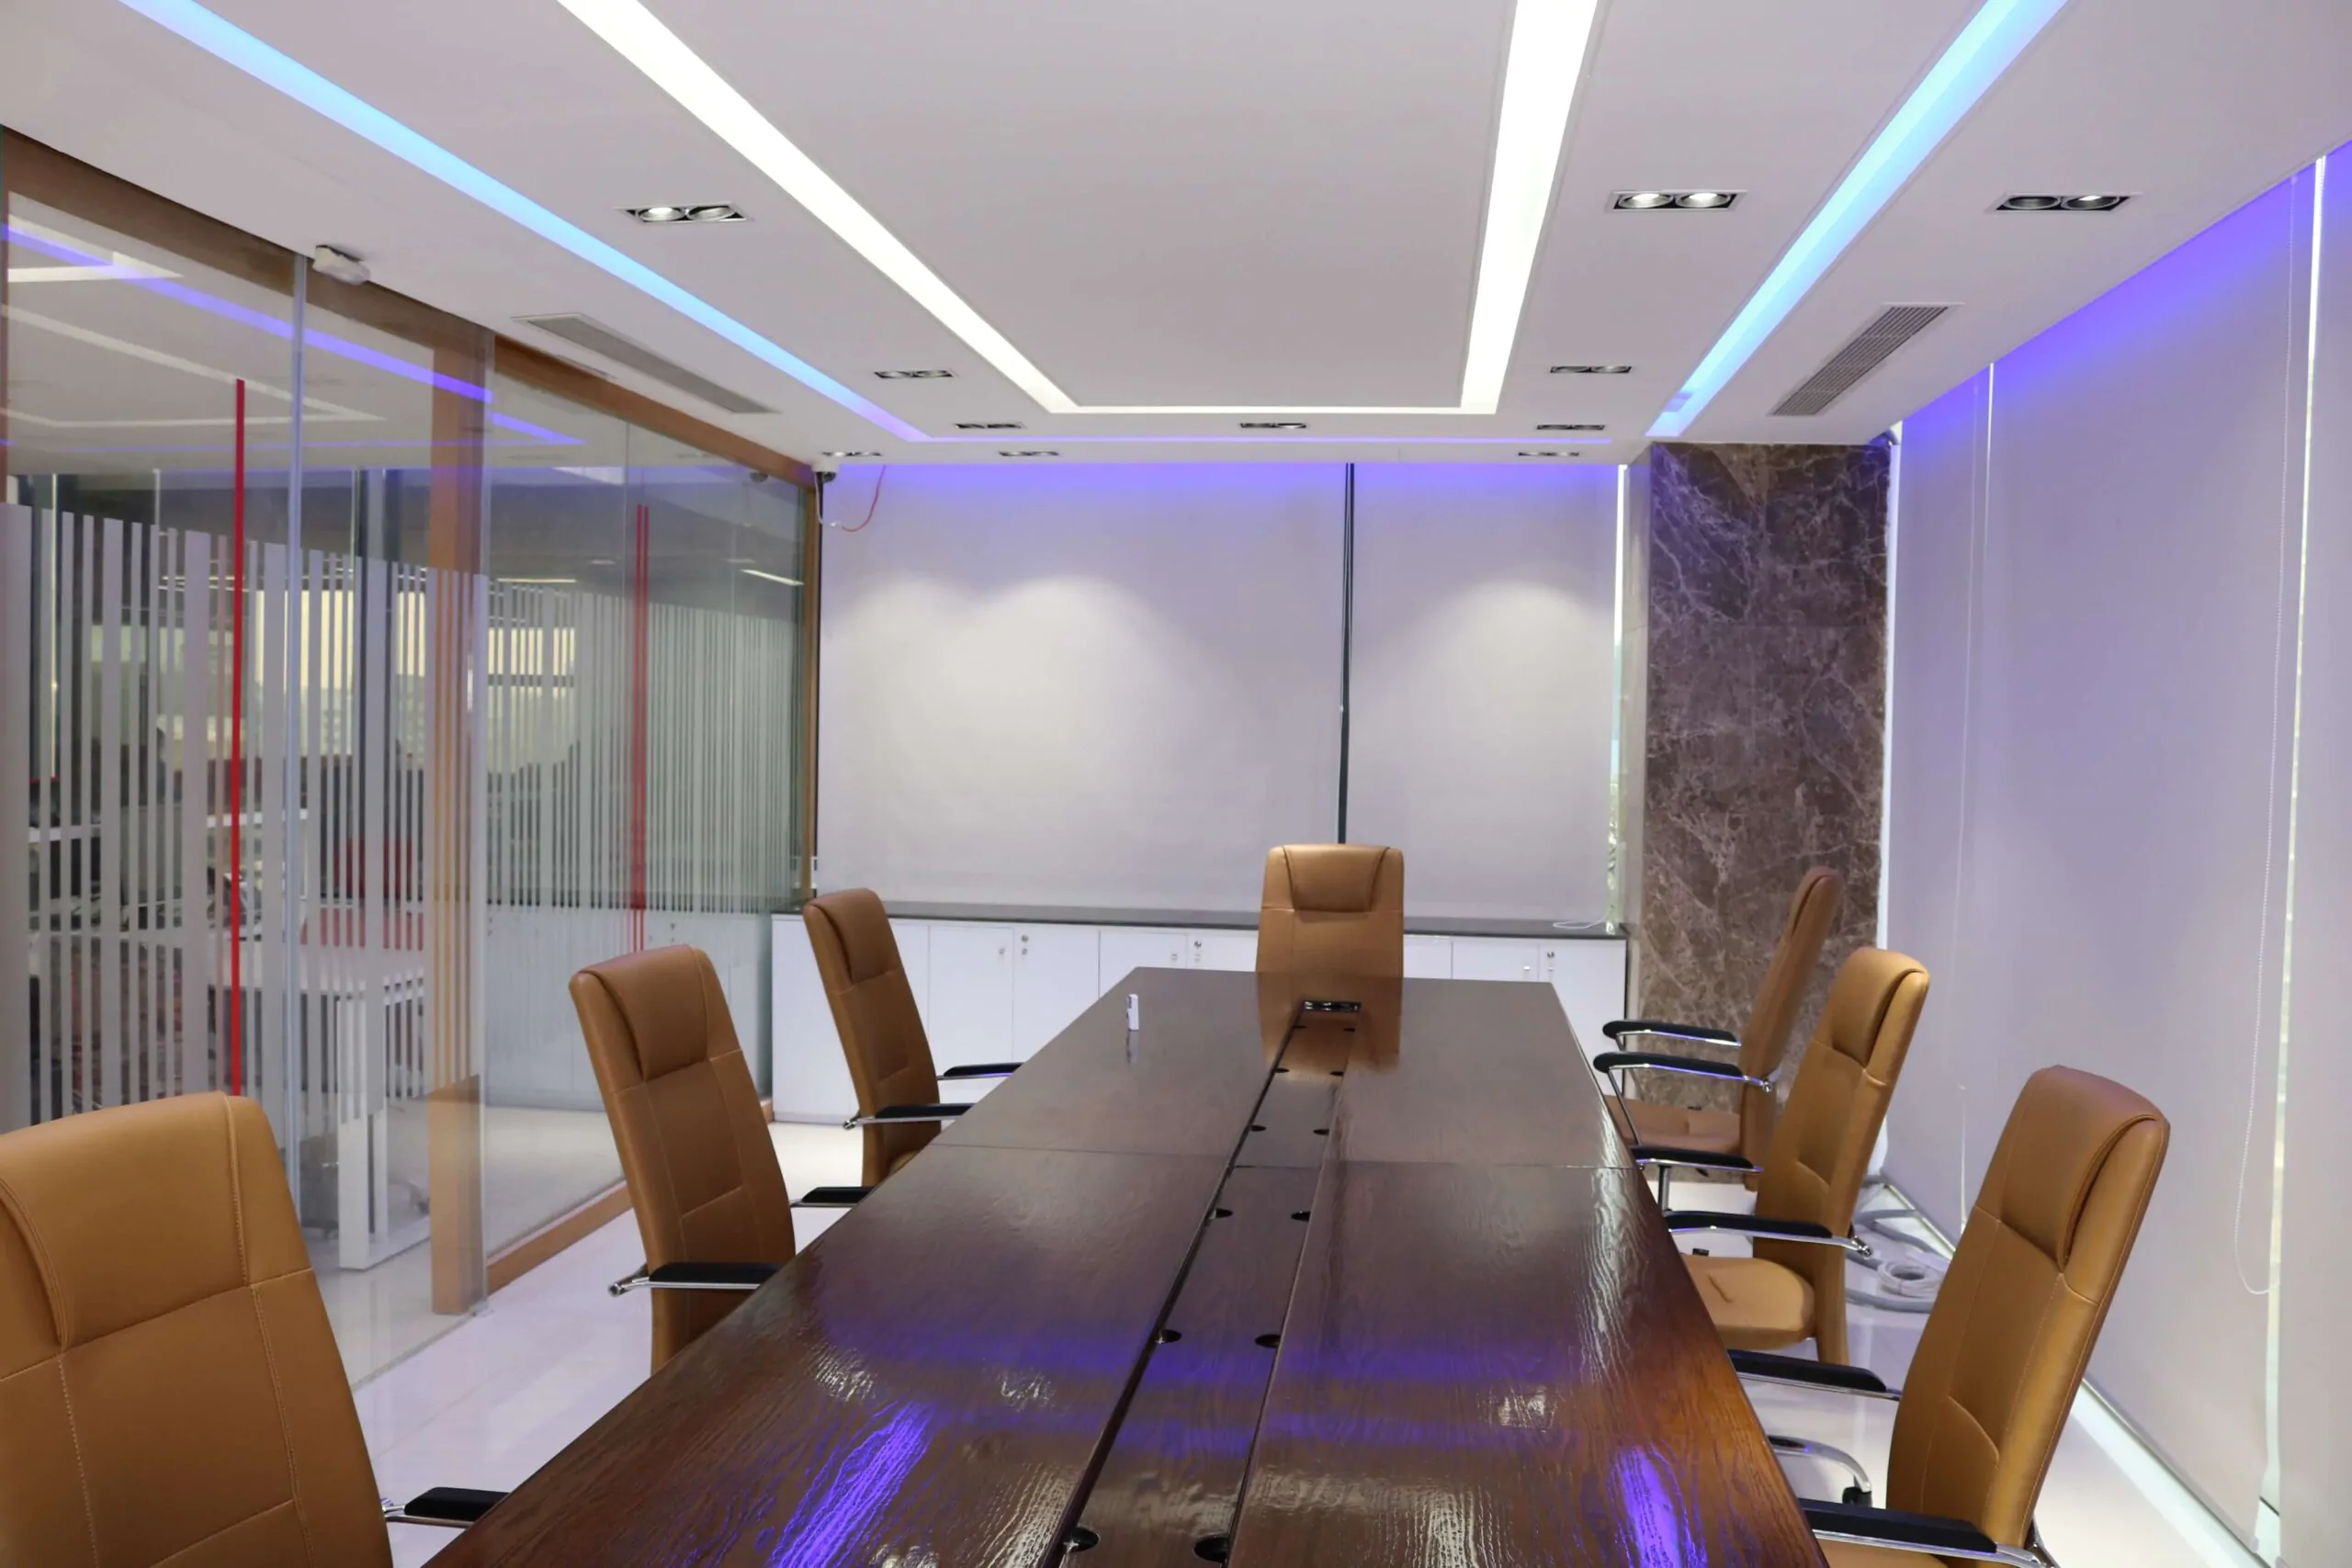 Flora Gulshan Complete Project Conference Room Interior Design (8)